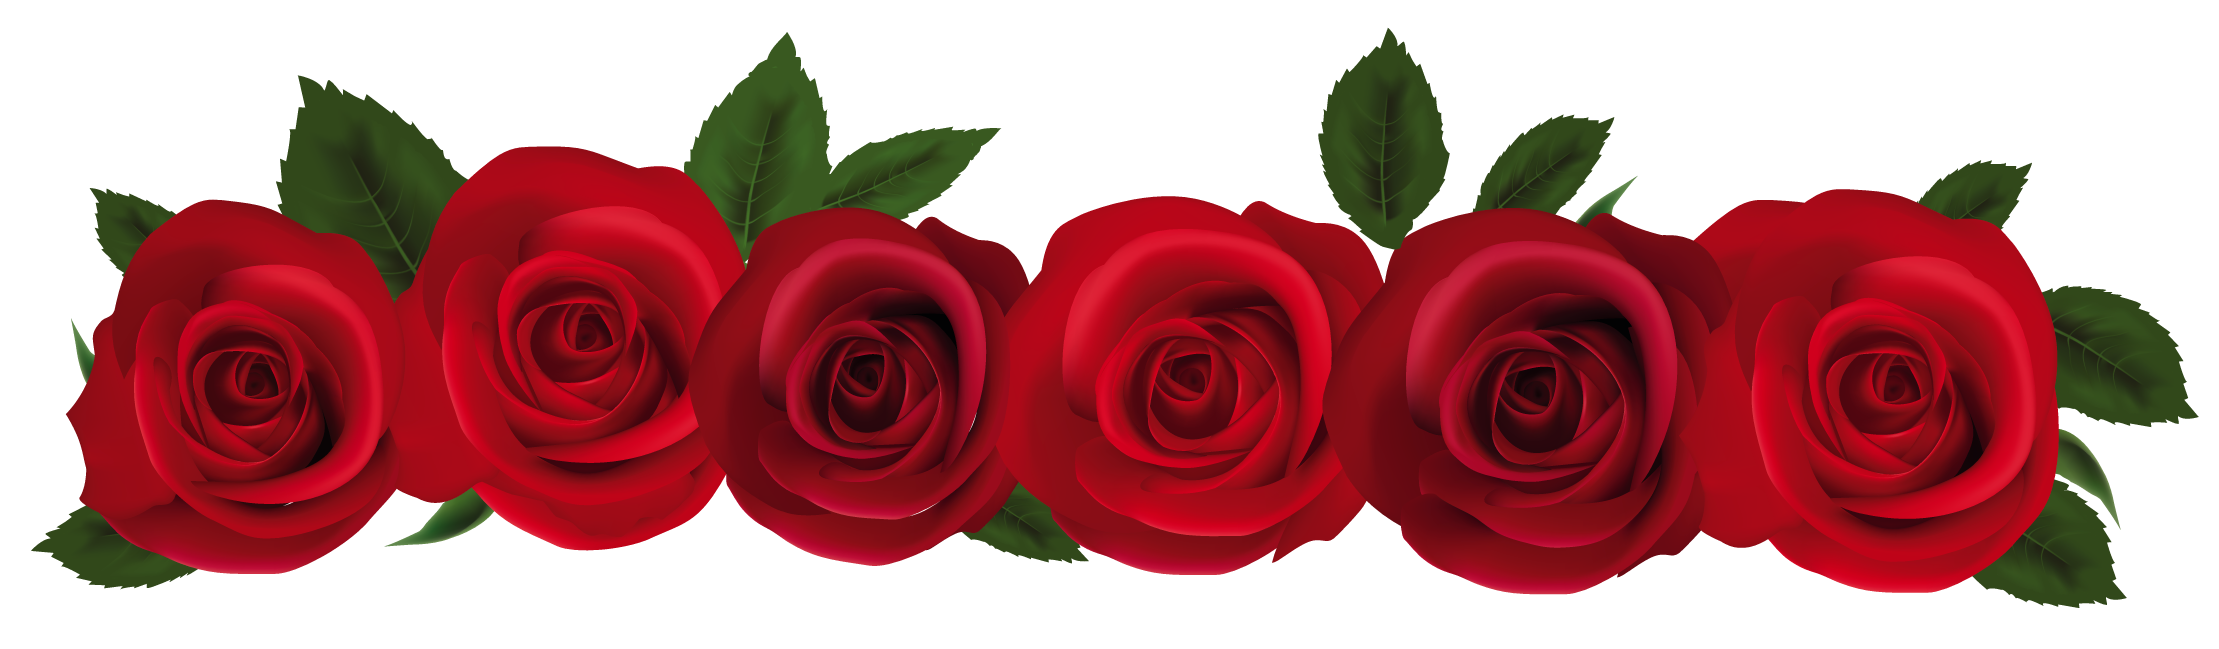 red roses clipart - photo #34